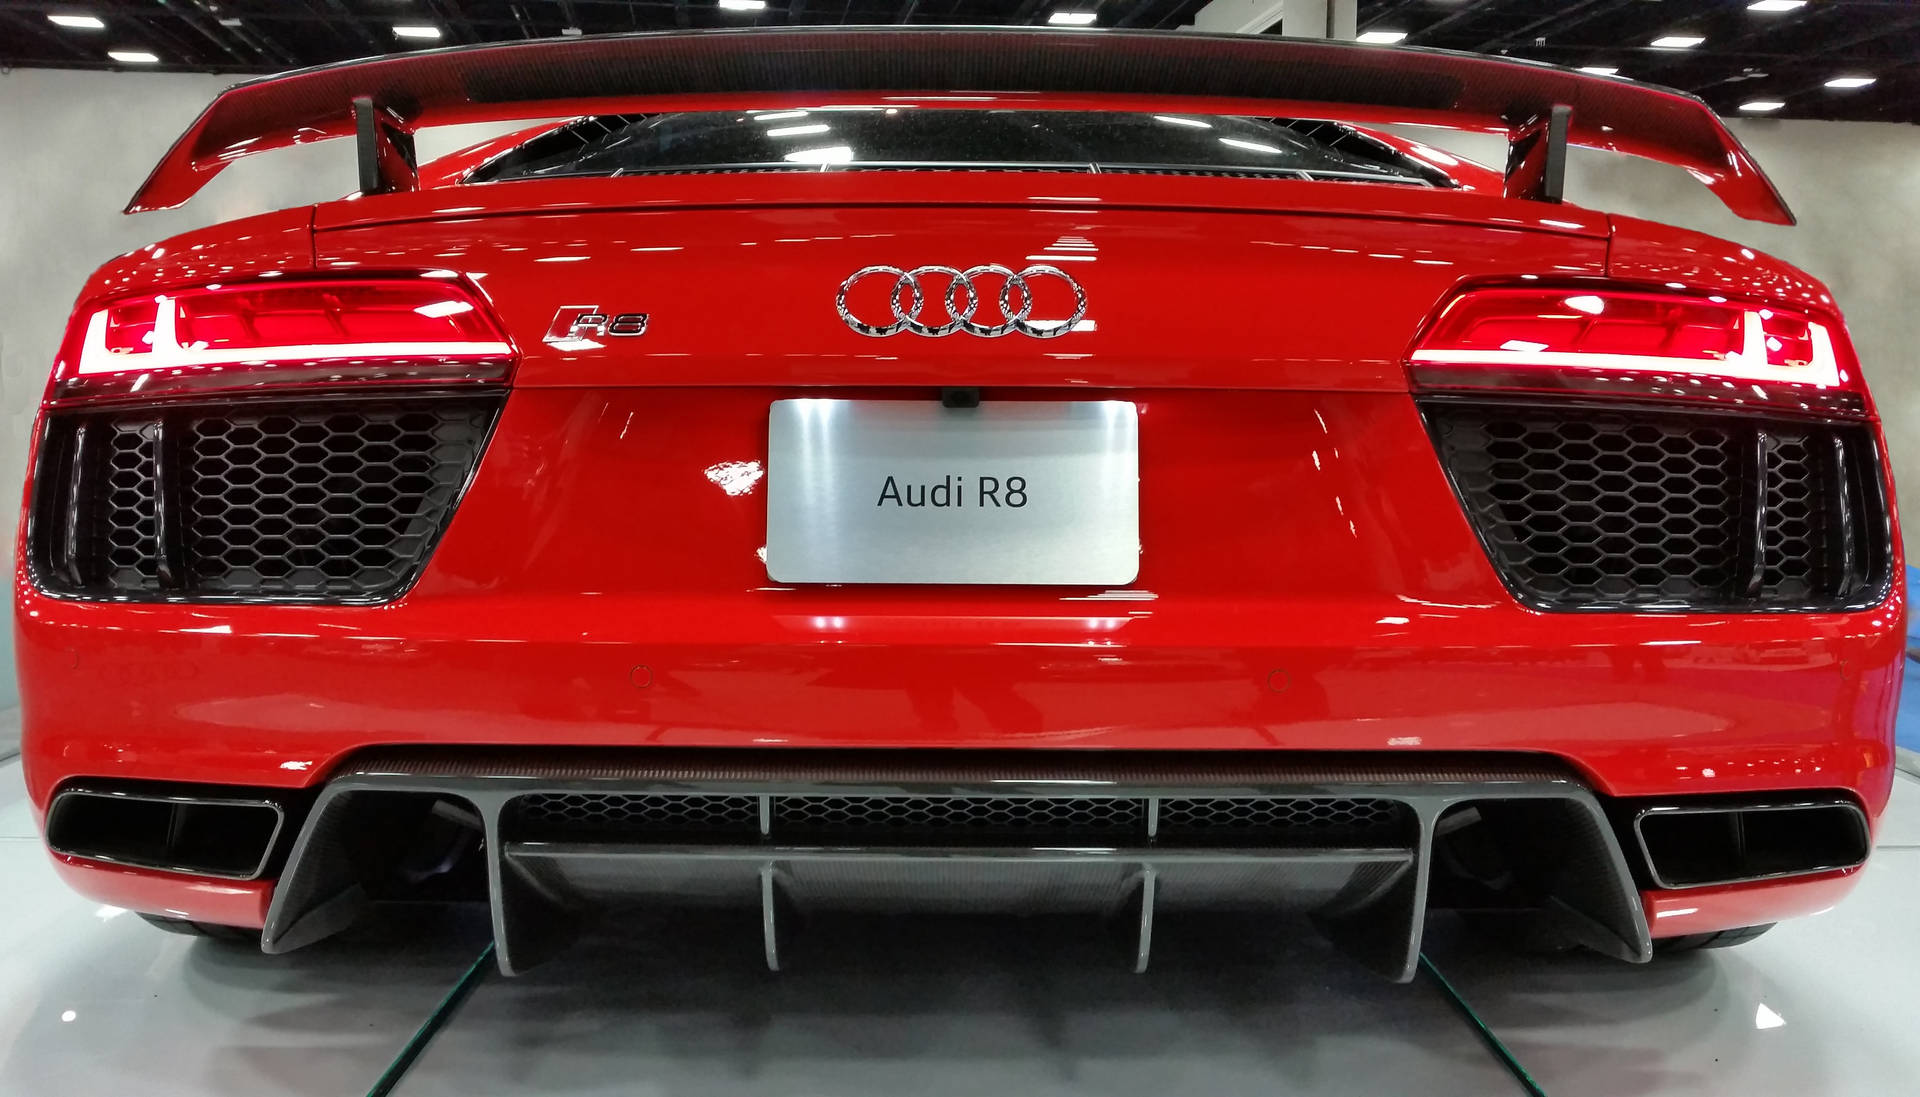 5232X2988 Audi Wallpaper and Background